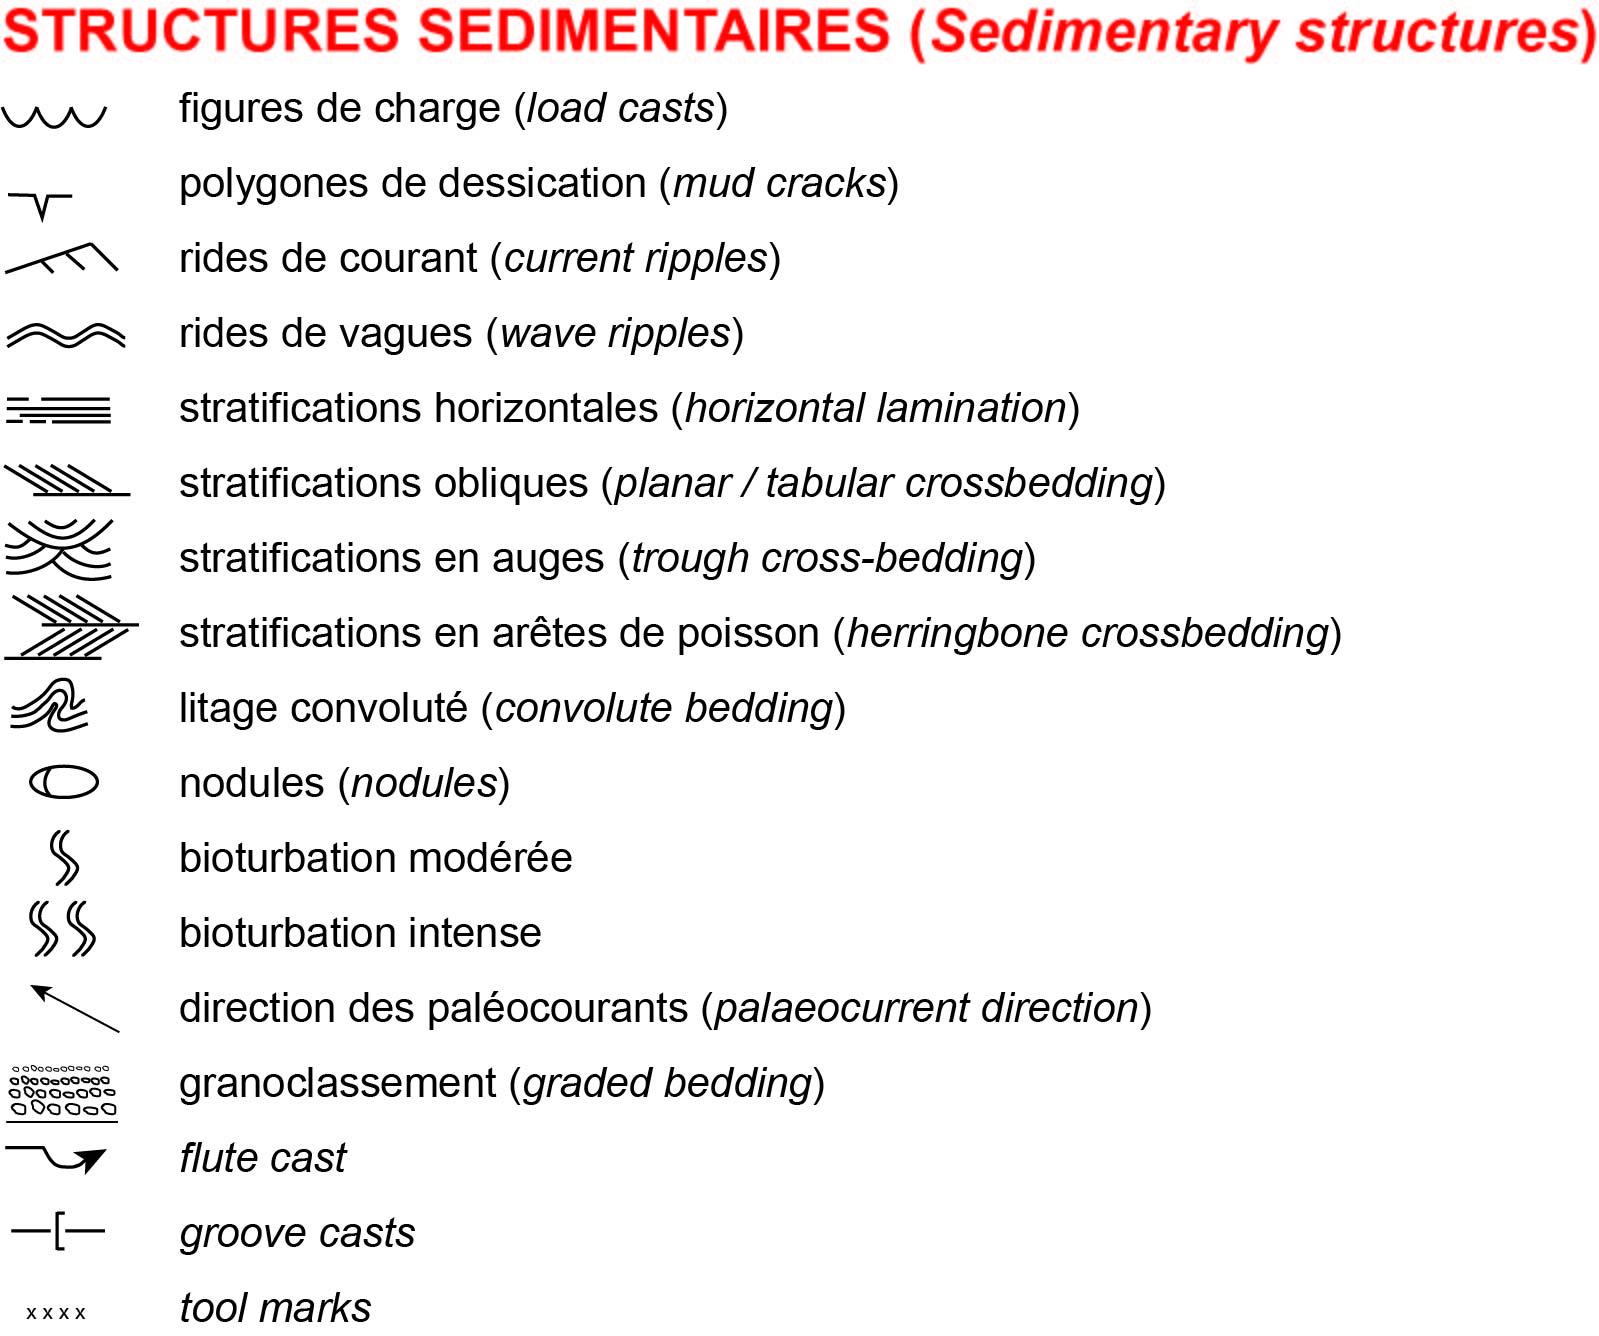 Liste figures structures sed